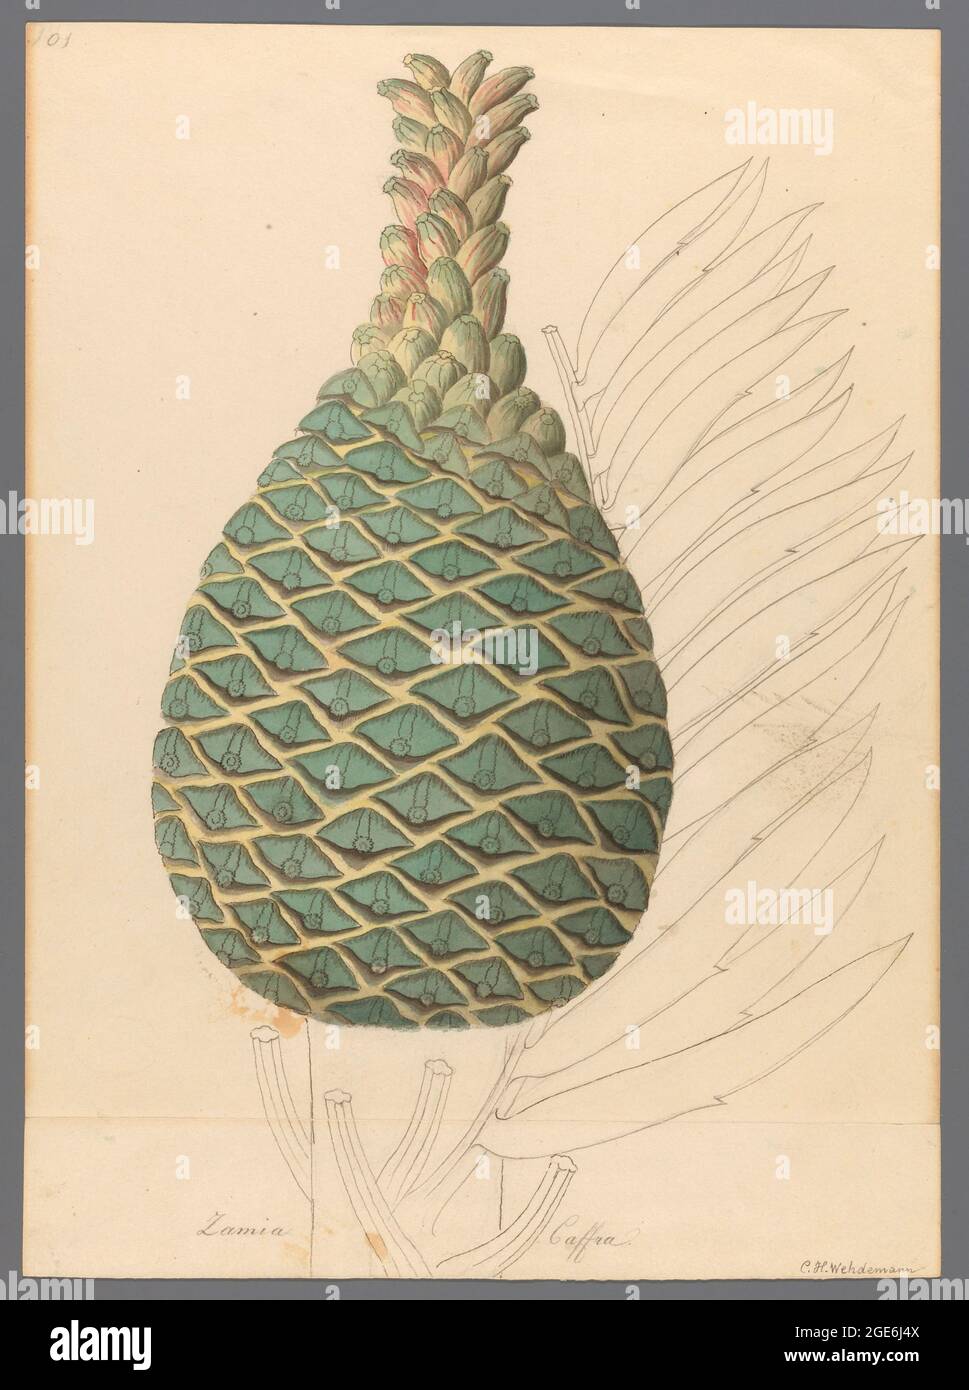 Zamia caffra [Encephalartos altensteinii female cone] (1817) commonly known as the breadtree, broodboom, Eastern Cape giant cycad or uJobane from a collection of ' Drawings of plants collected at Cape Town ' by Clemenz Heinrich, Wehdemann, 1762-1835 Collected and drawn in the Cape Colony, South Africa Stock Photo